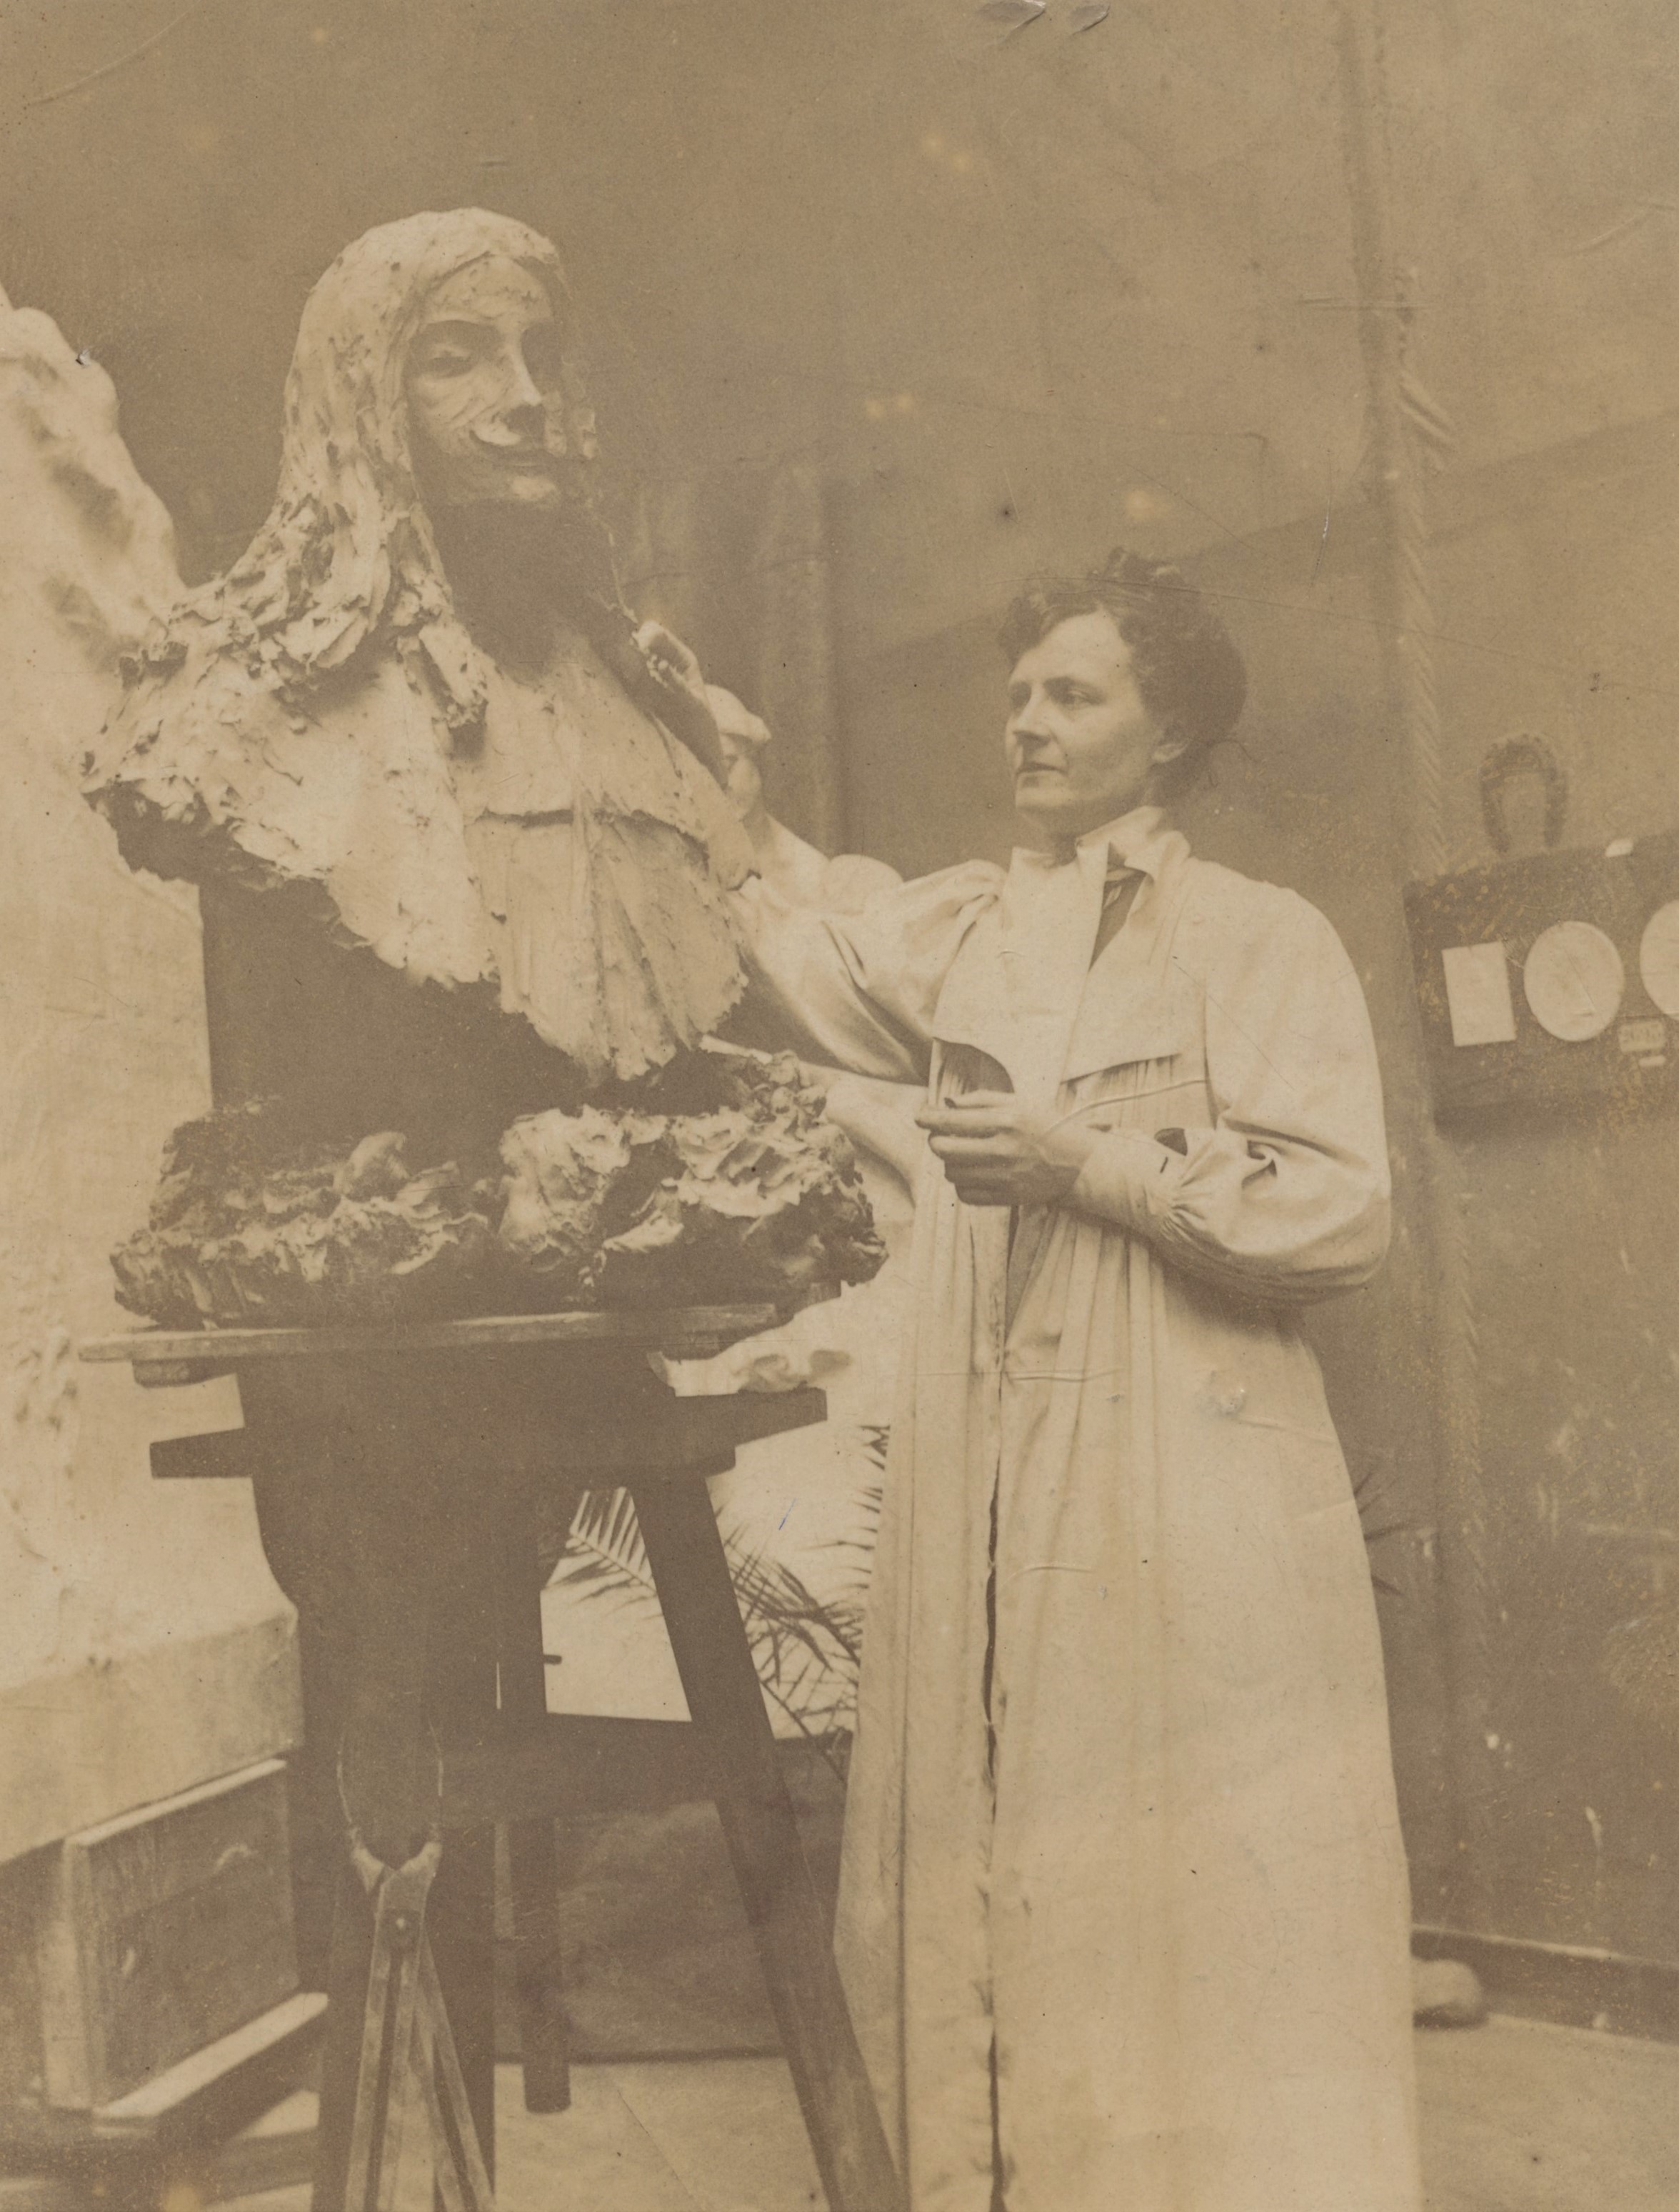 Ida Matton at work on her bust of Molière. Photographer and date unknown. Uppsala University Library (6690)